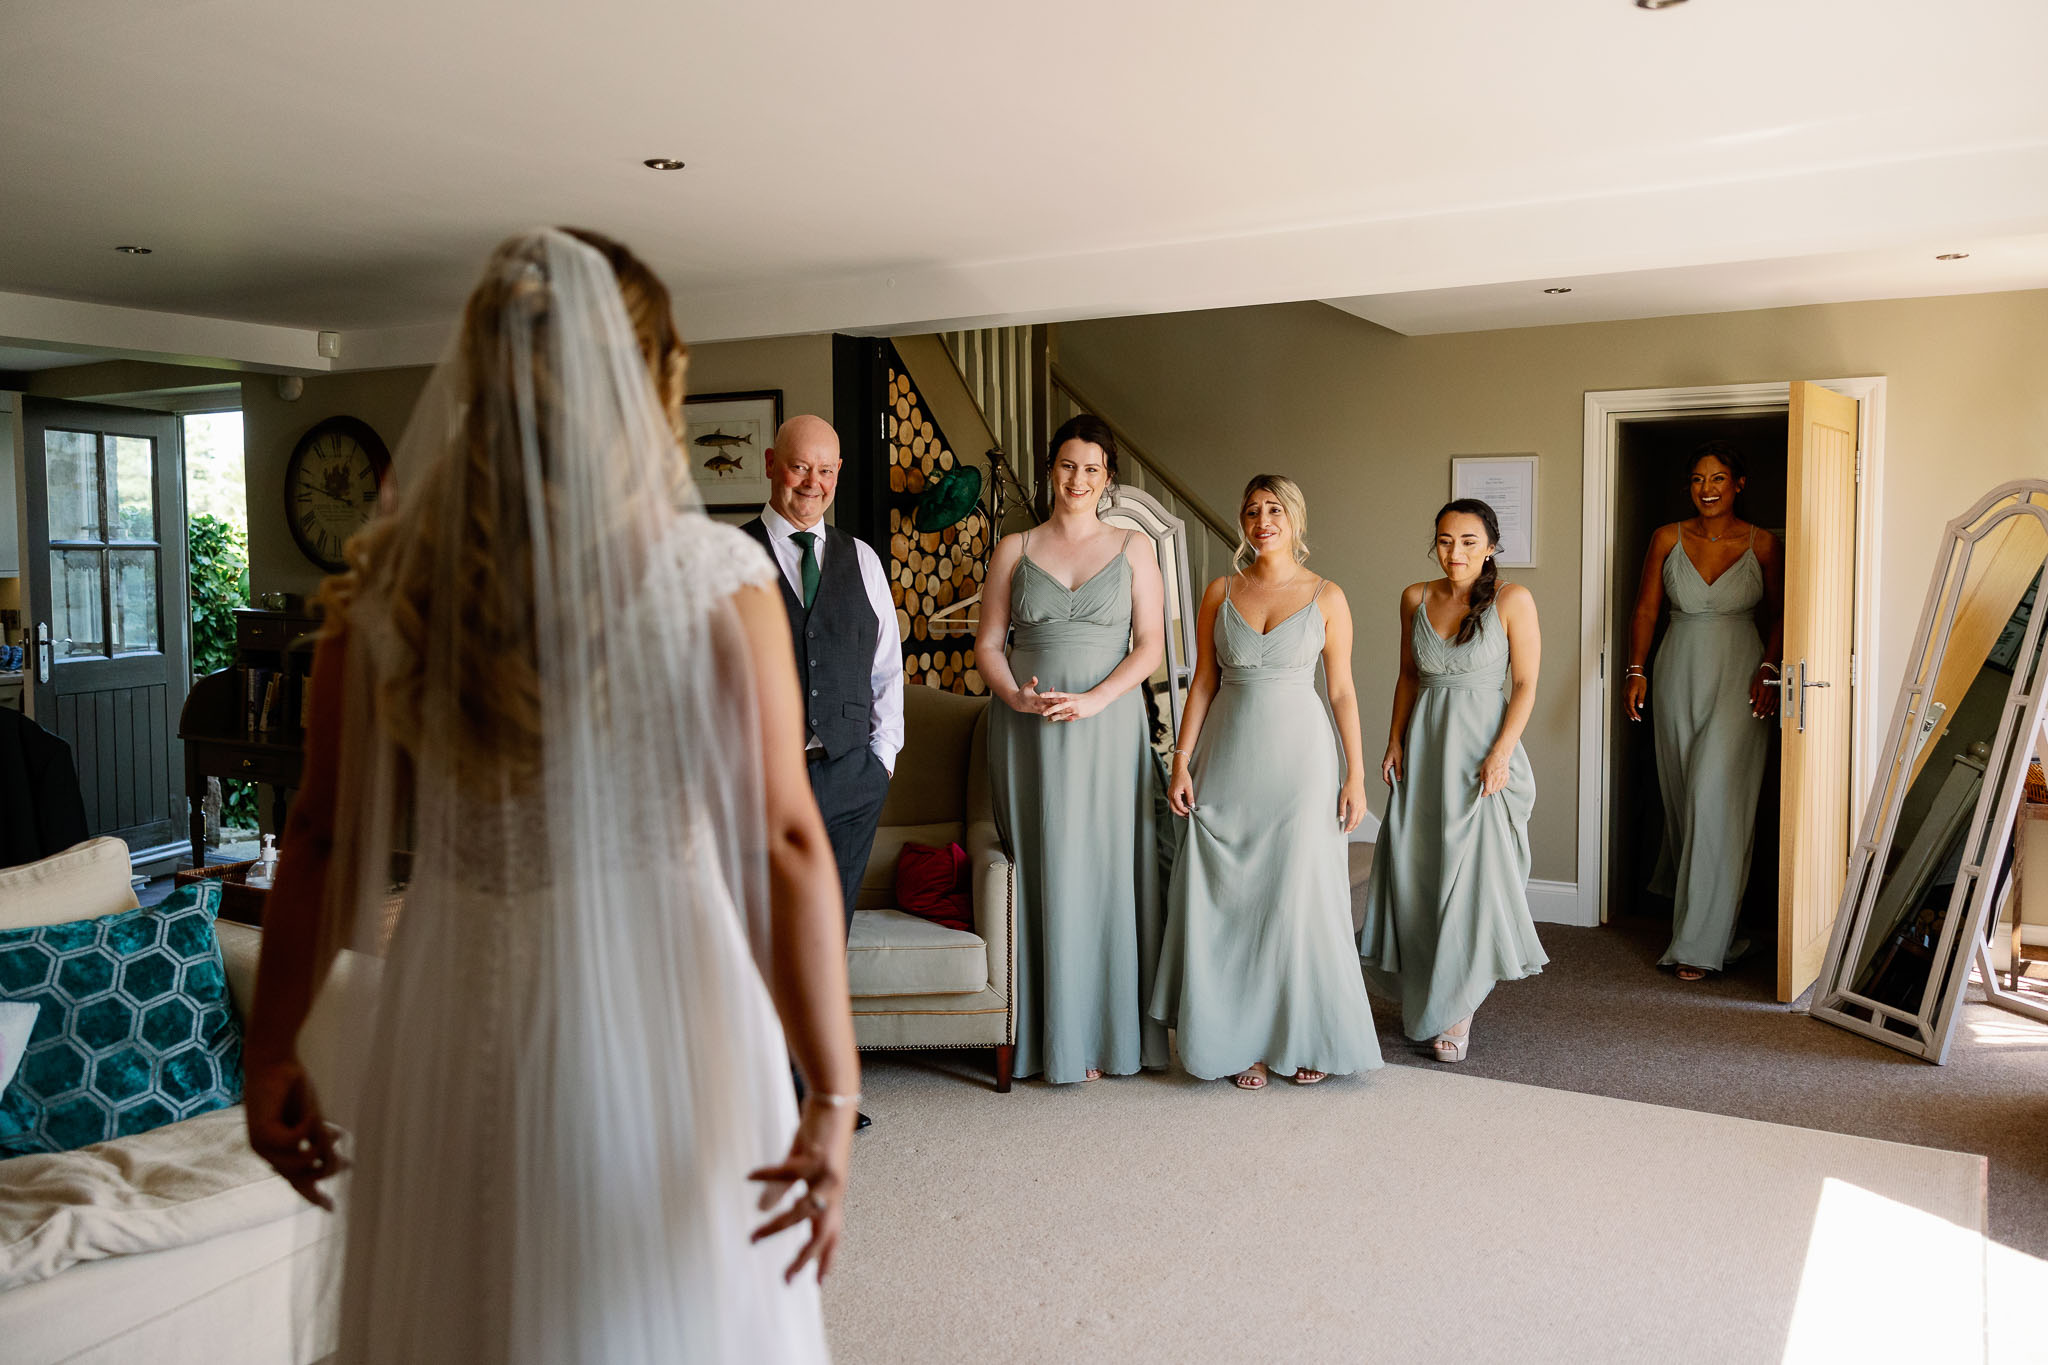 Bridesmaids see bride for the first time 